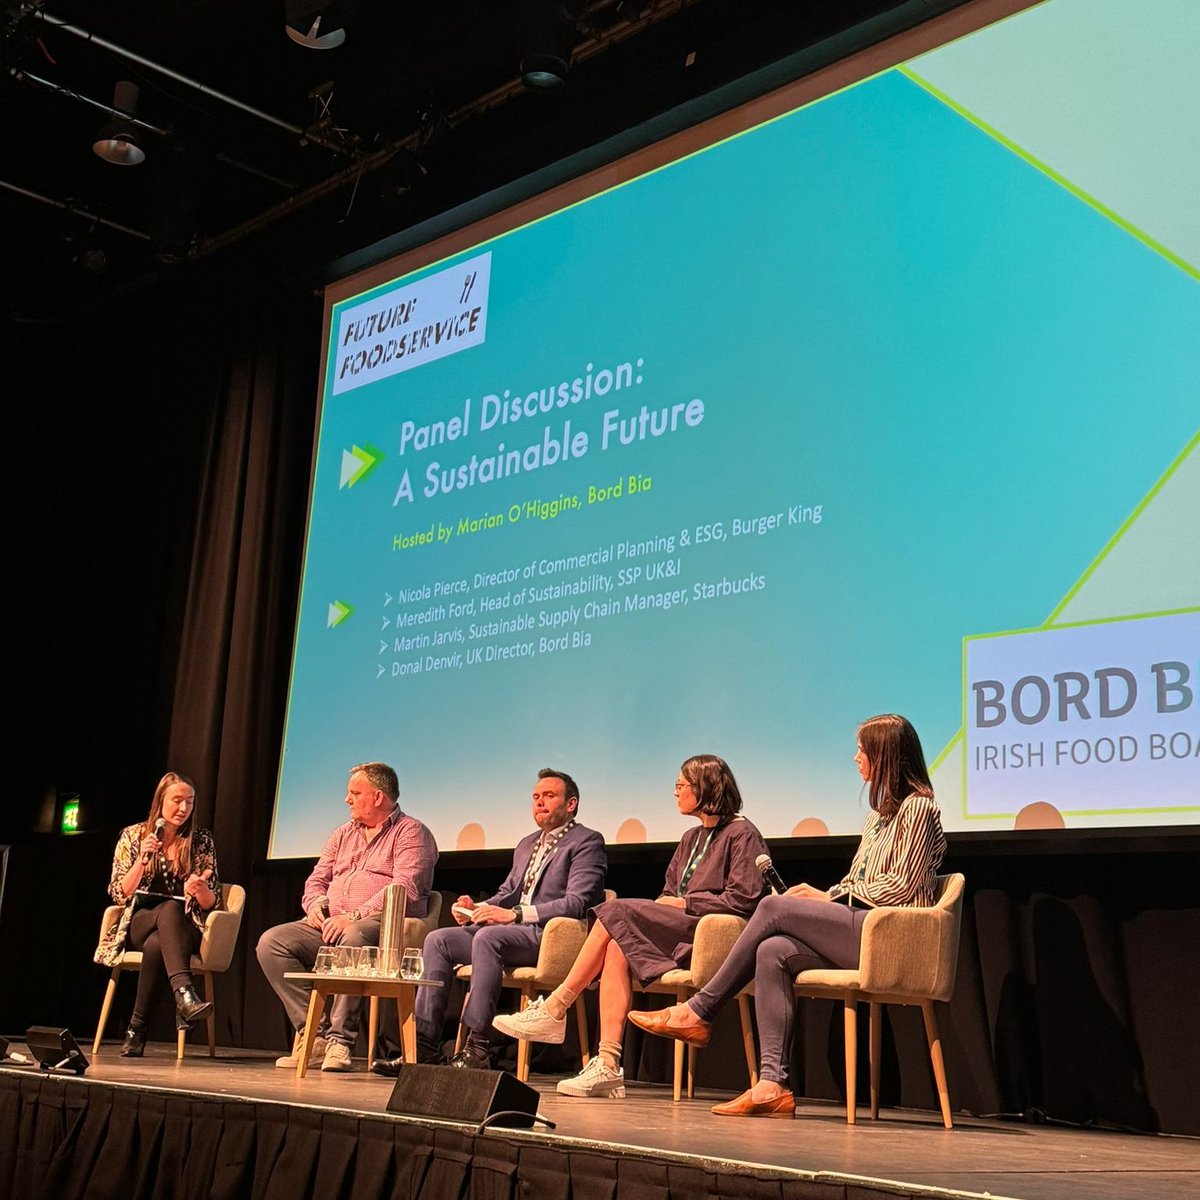 It's a great afternoon at the Foodservice Forum hosted by @Bordbia in London! 

This has been a fantastic and insightful event, featuring engaging panels with industry leaders.

#irishfoodproducers #irishfood #sustainablefood #foodservice #bordbia